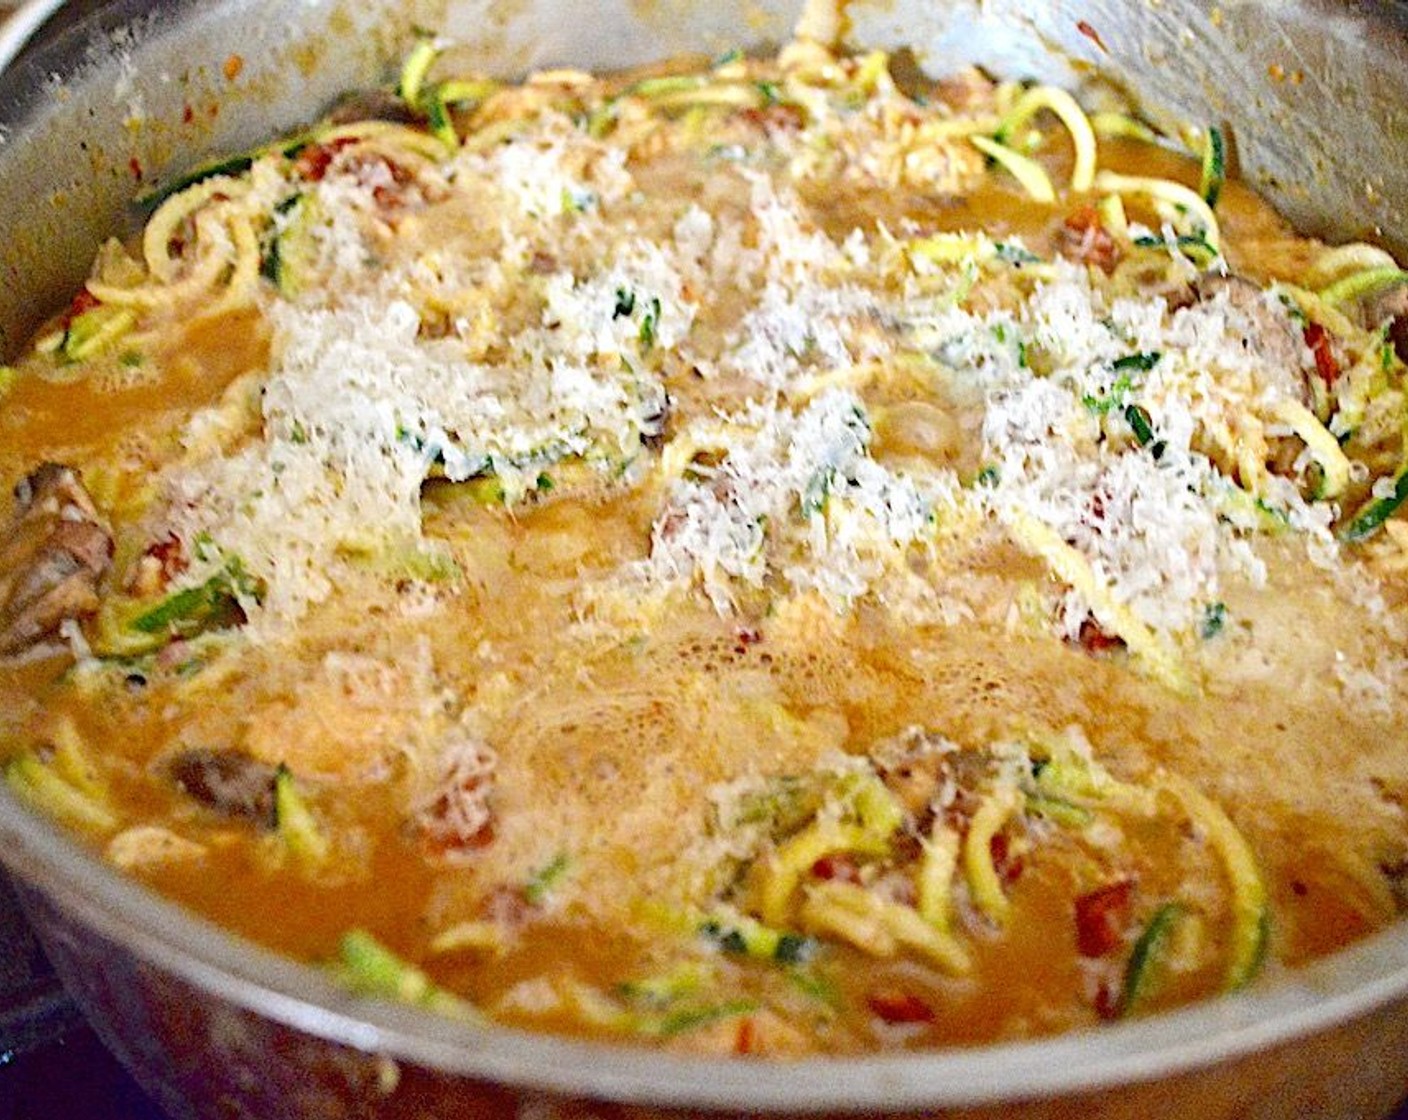 step 6 Return the chicken and veggies to the pan and also add in Zucchini (4). Stir everything well, then sprinkle the Parmesan Cheese (1/4 cup) on top. Let it bubble for a minute on the stove, then transfer it to the oven to bake for 15 minutes.